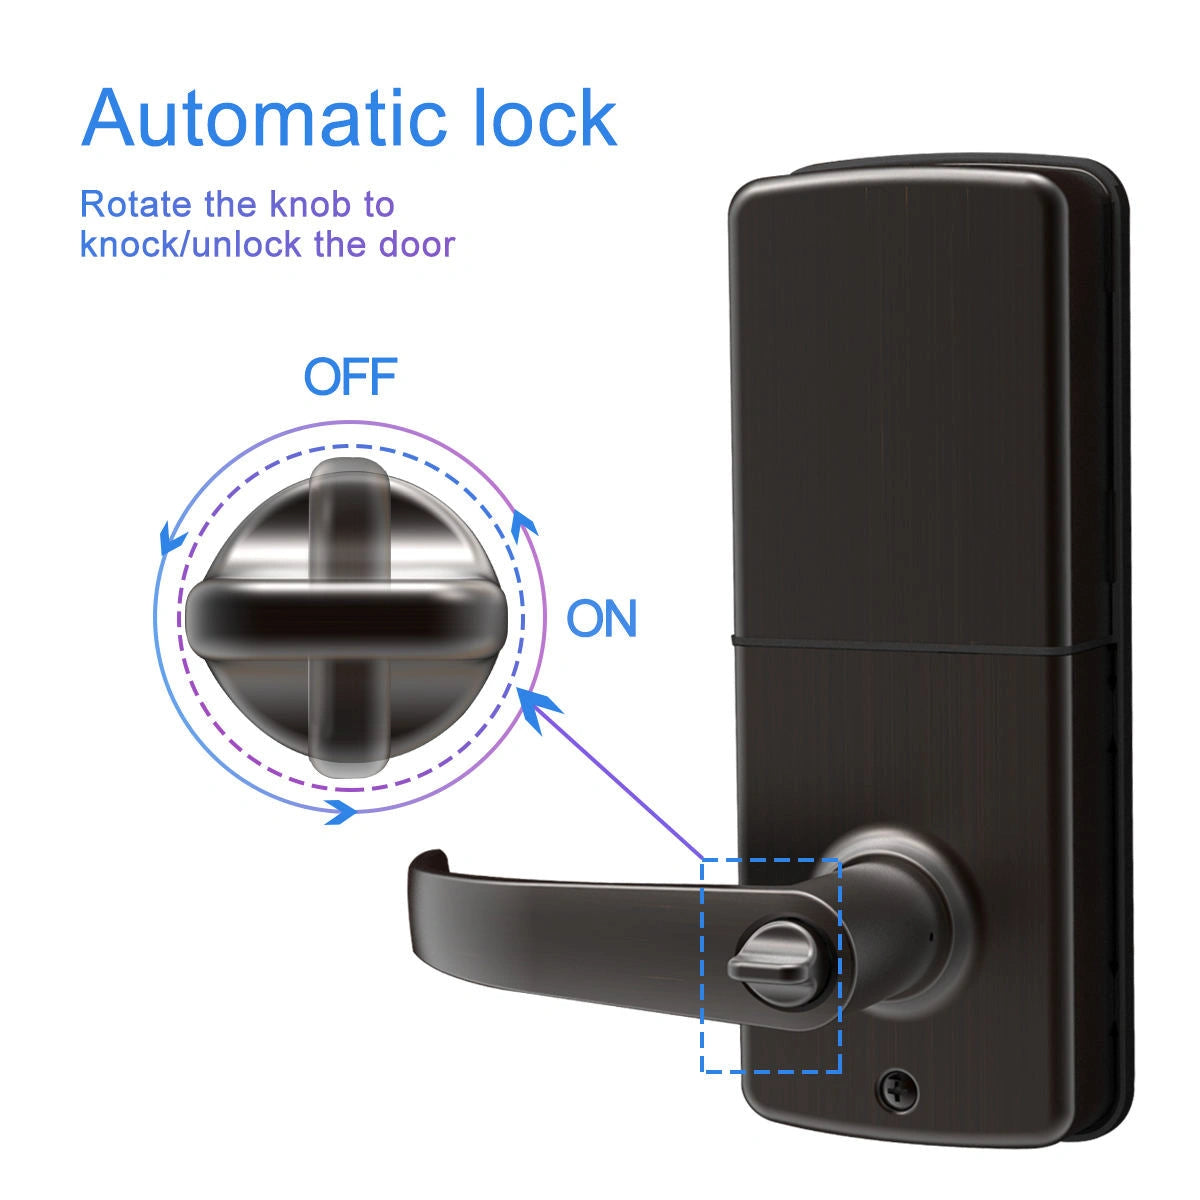 Electronic keyless entry door lock with automatic lock, lever and handle